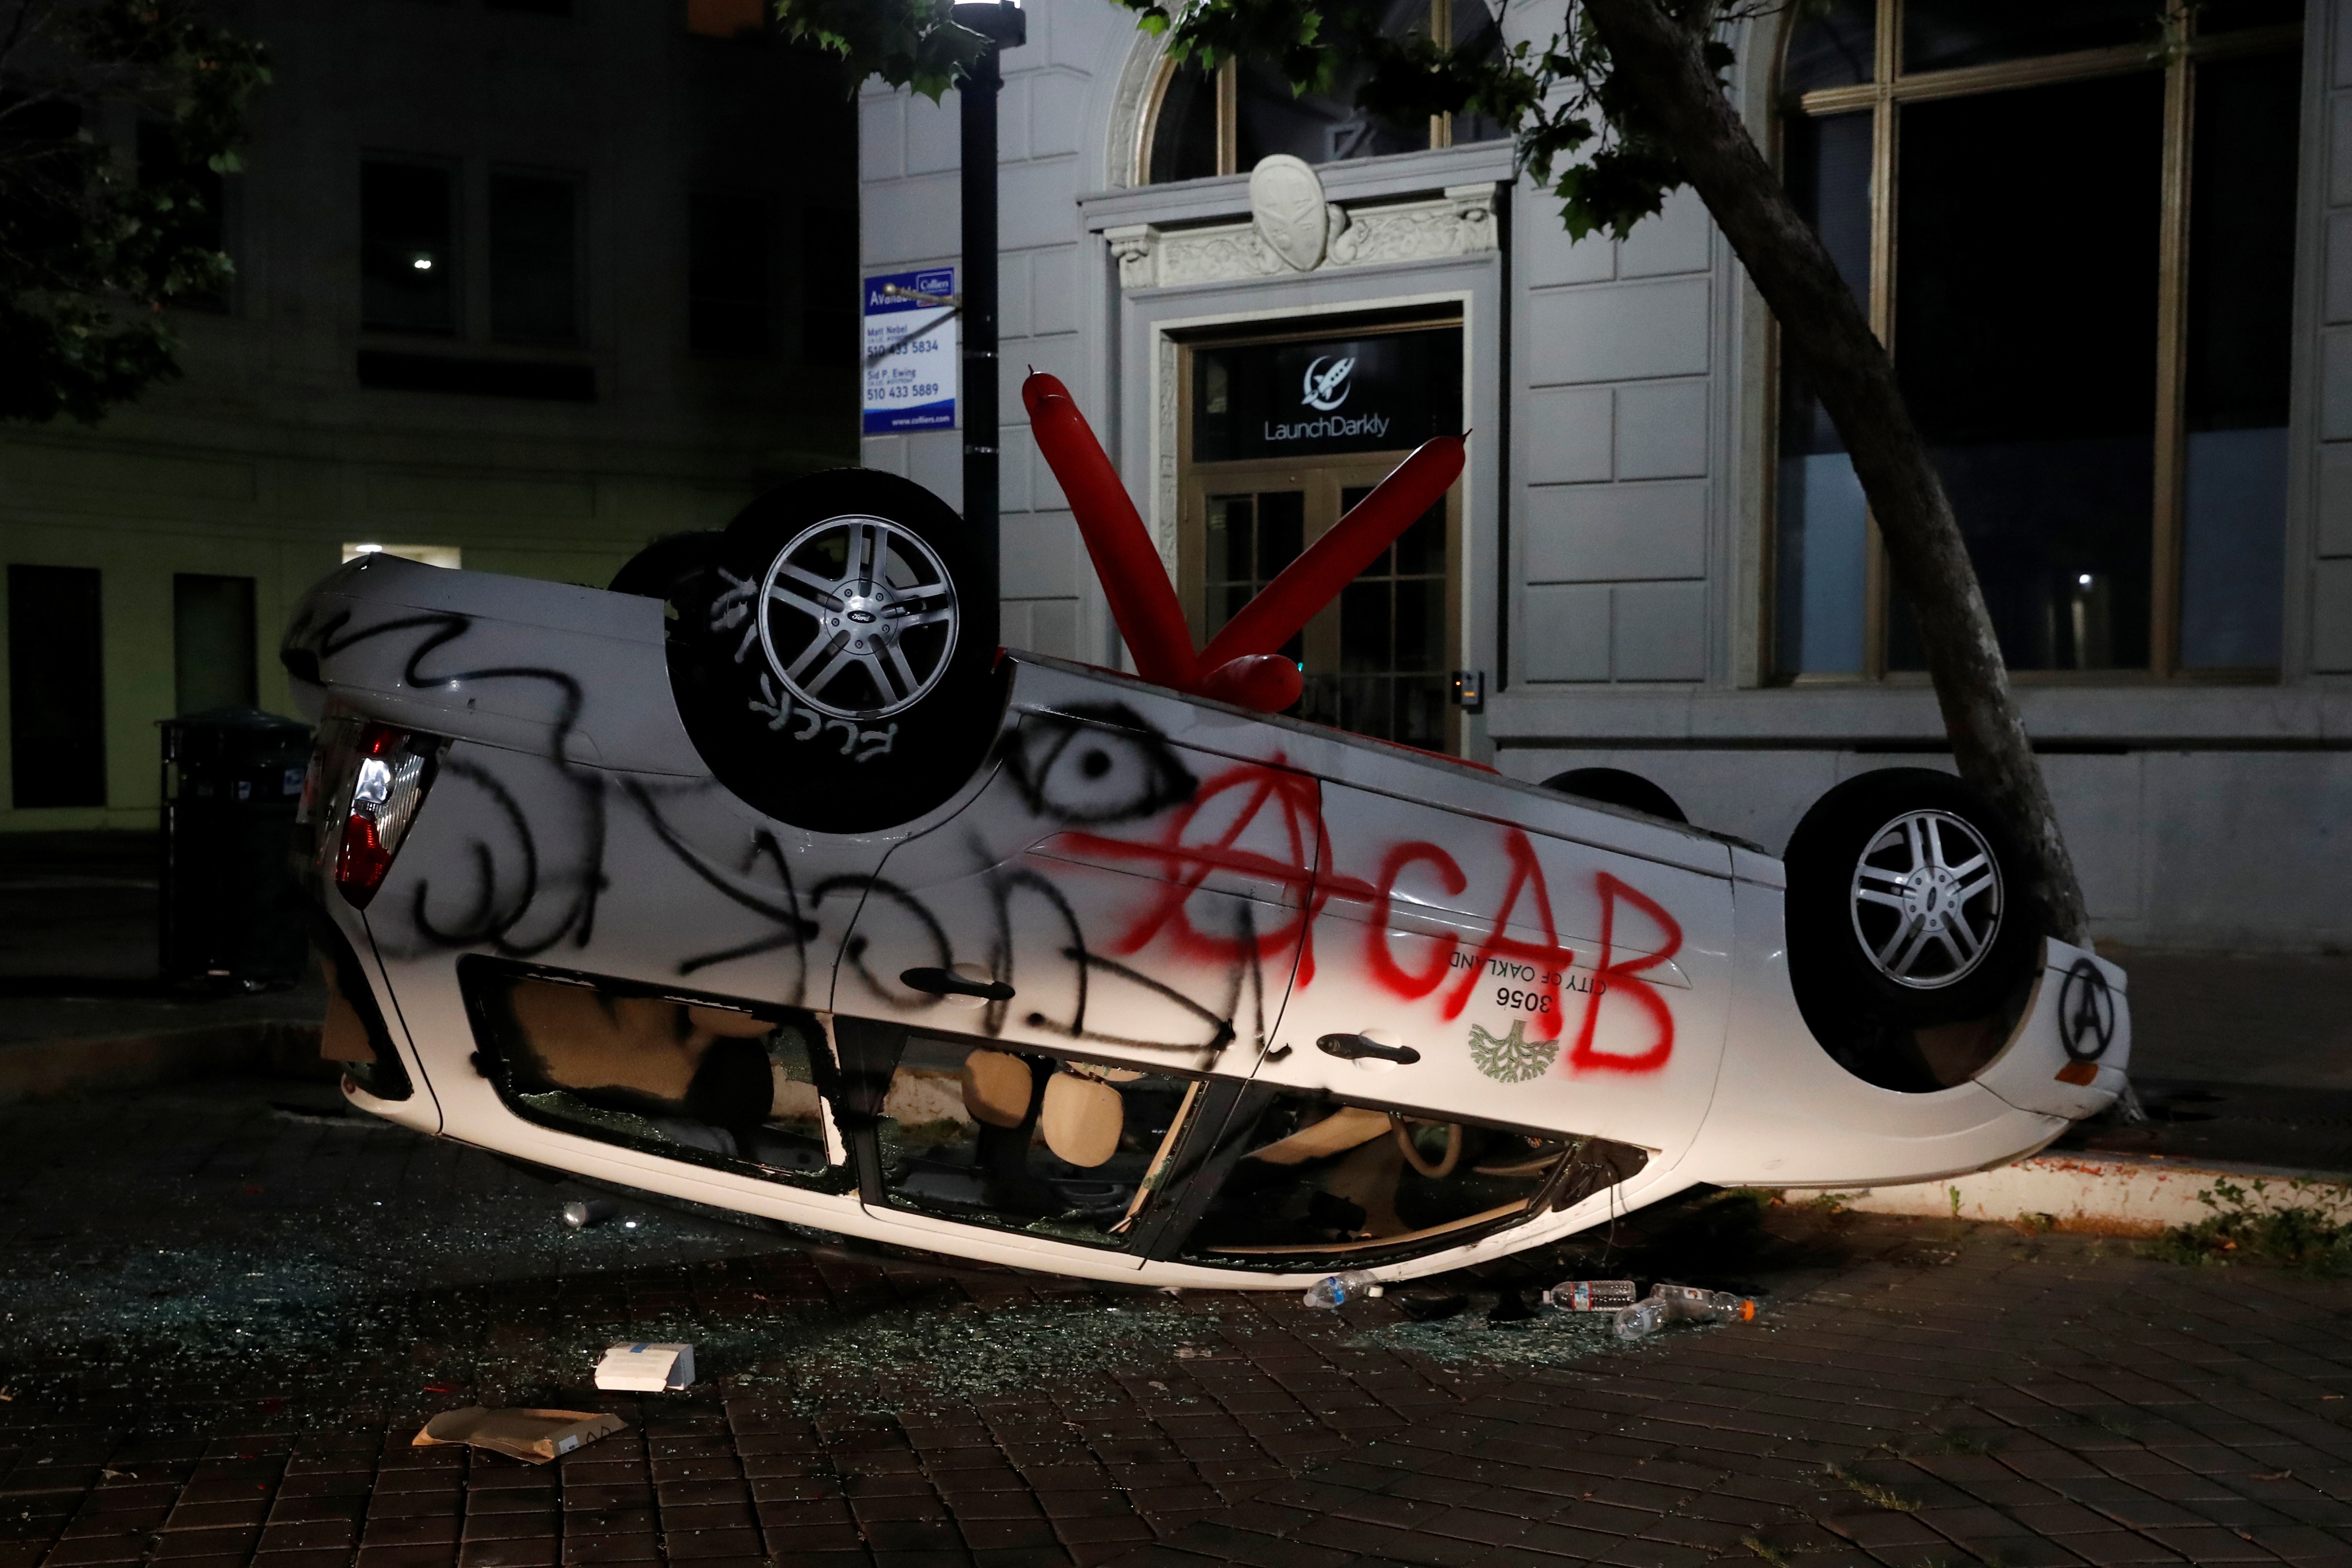 An overturned and vandalized City of Oakland vehicle is seen during a protest.